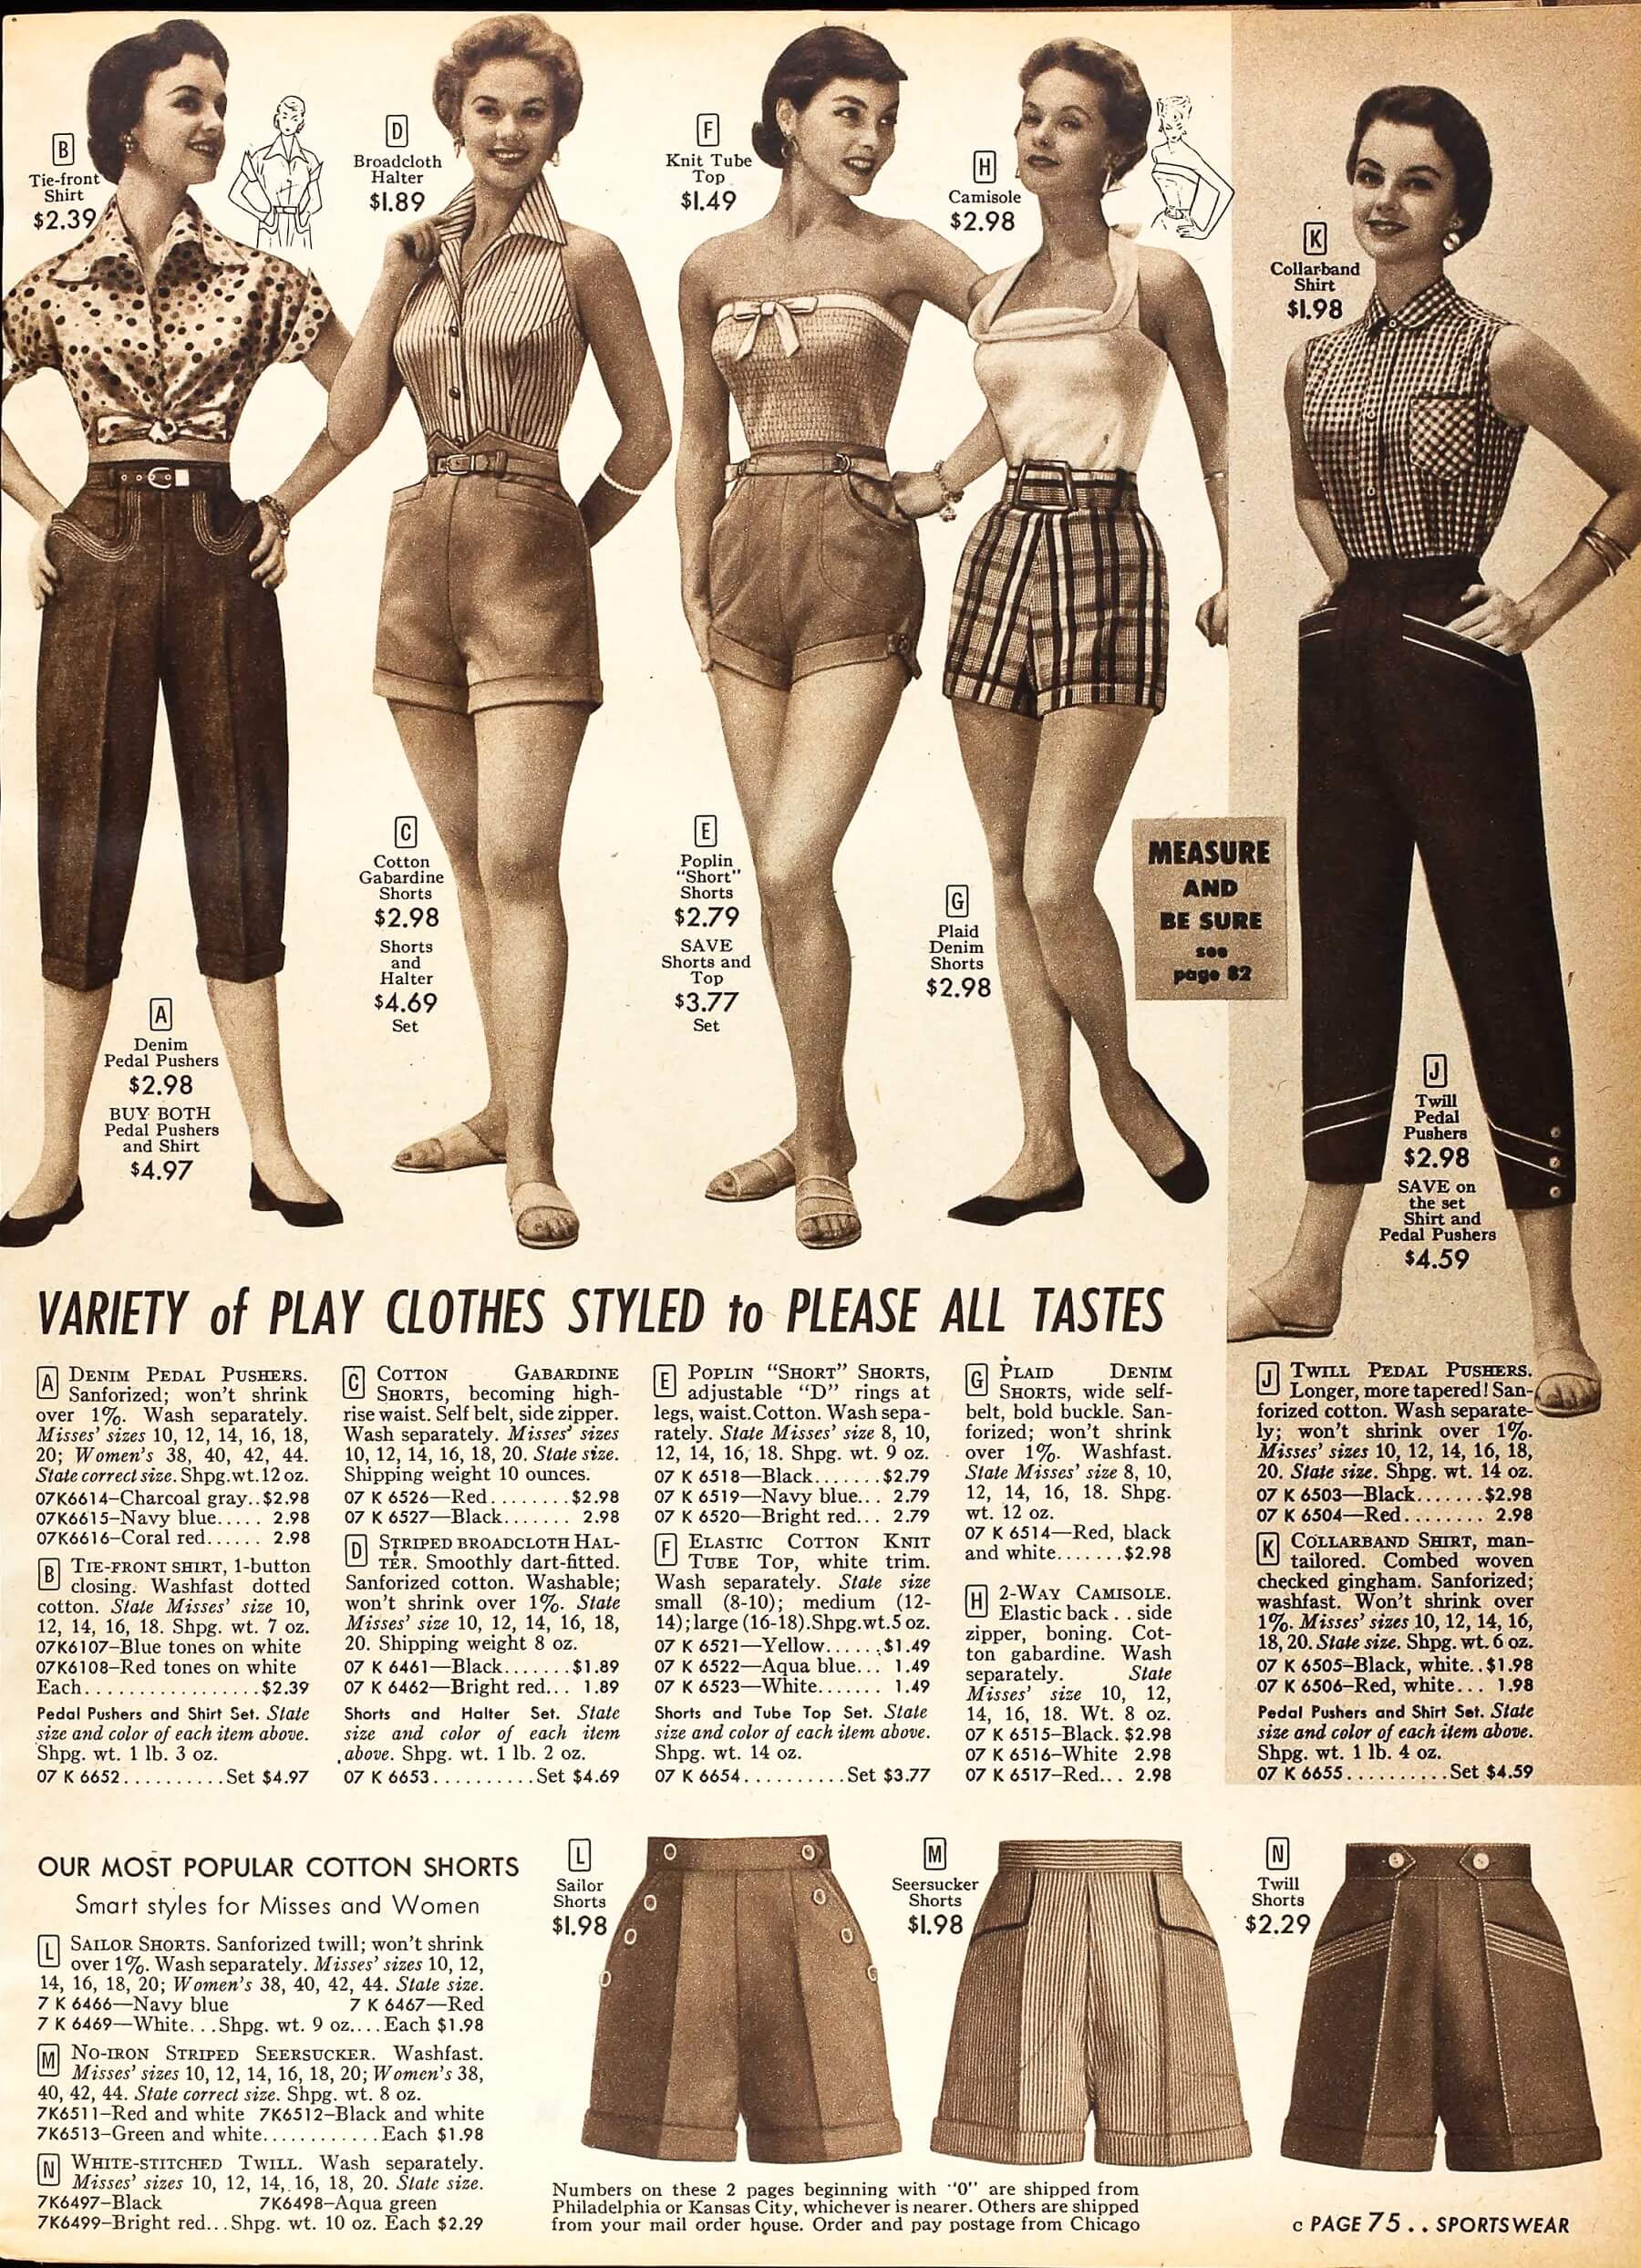 Decades of Fashion: late 1800s to 1940s